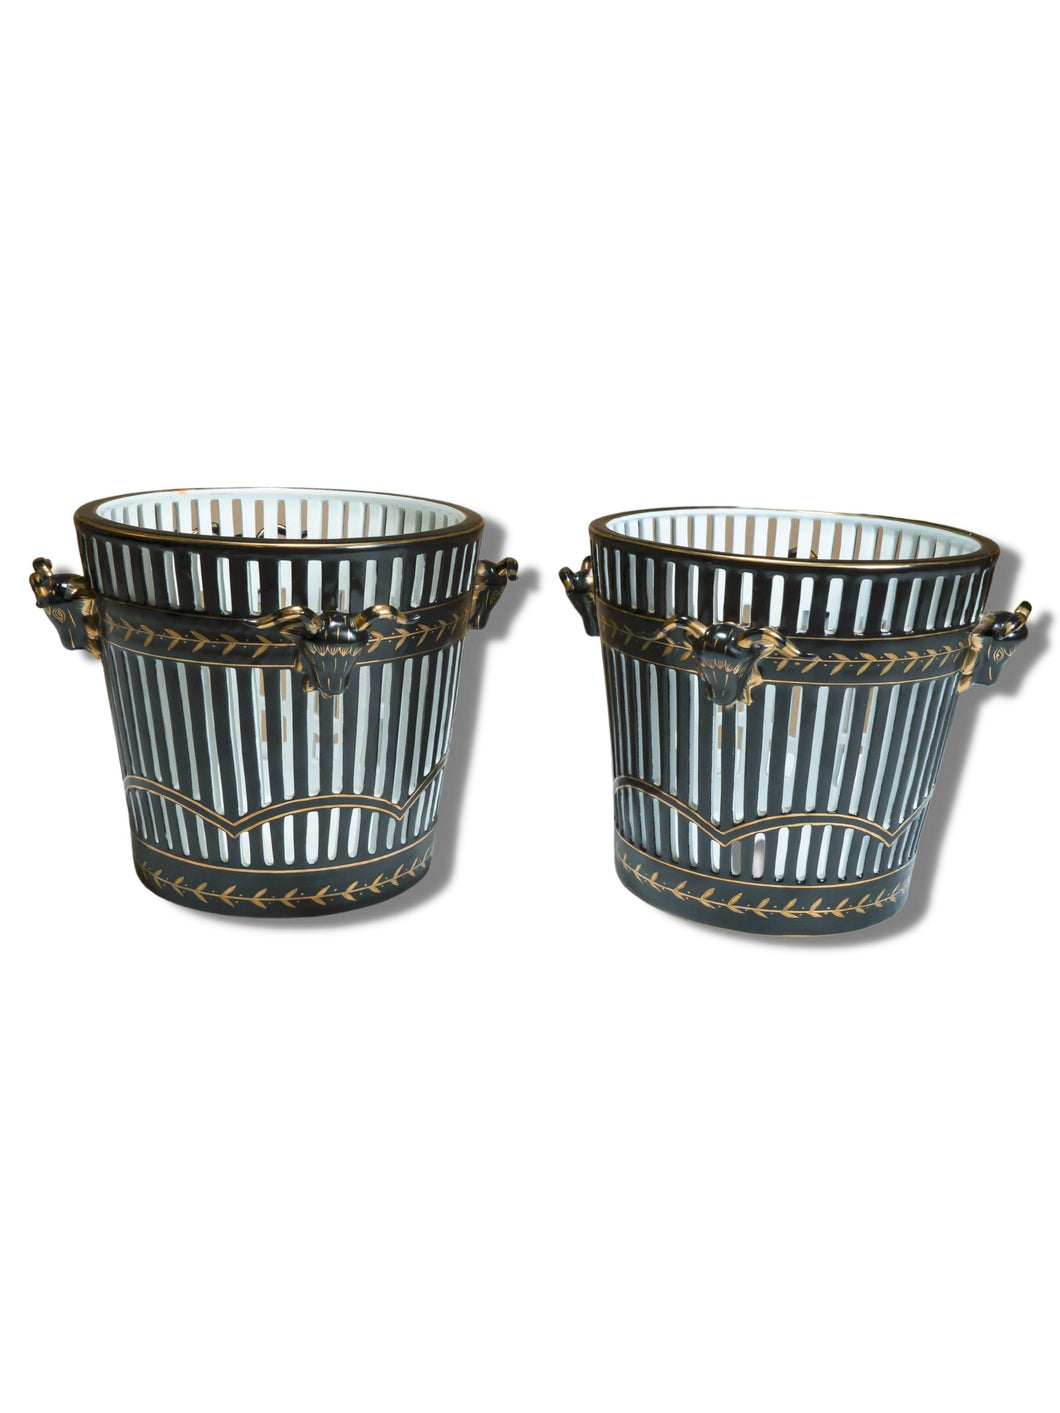 Reticulated Porcelain Planters (Pair)